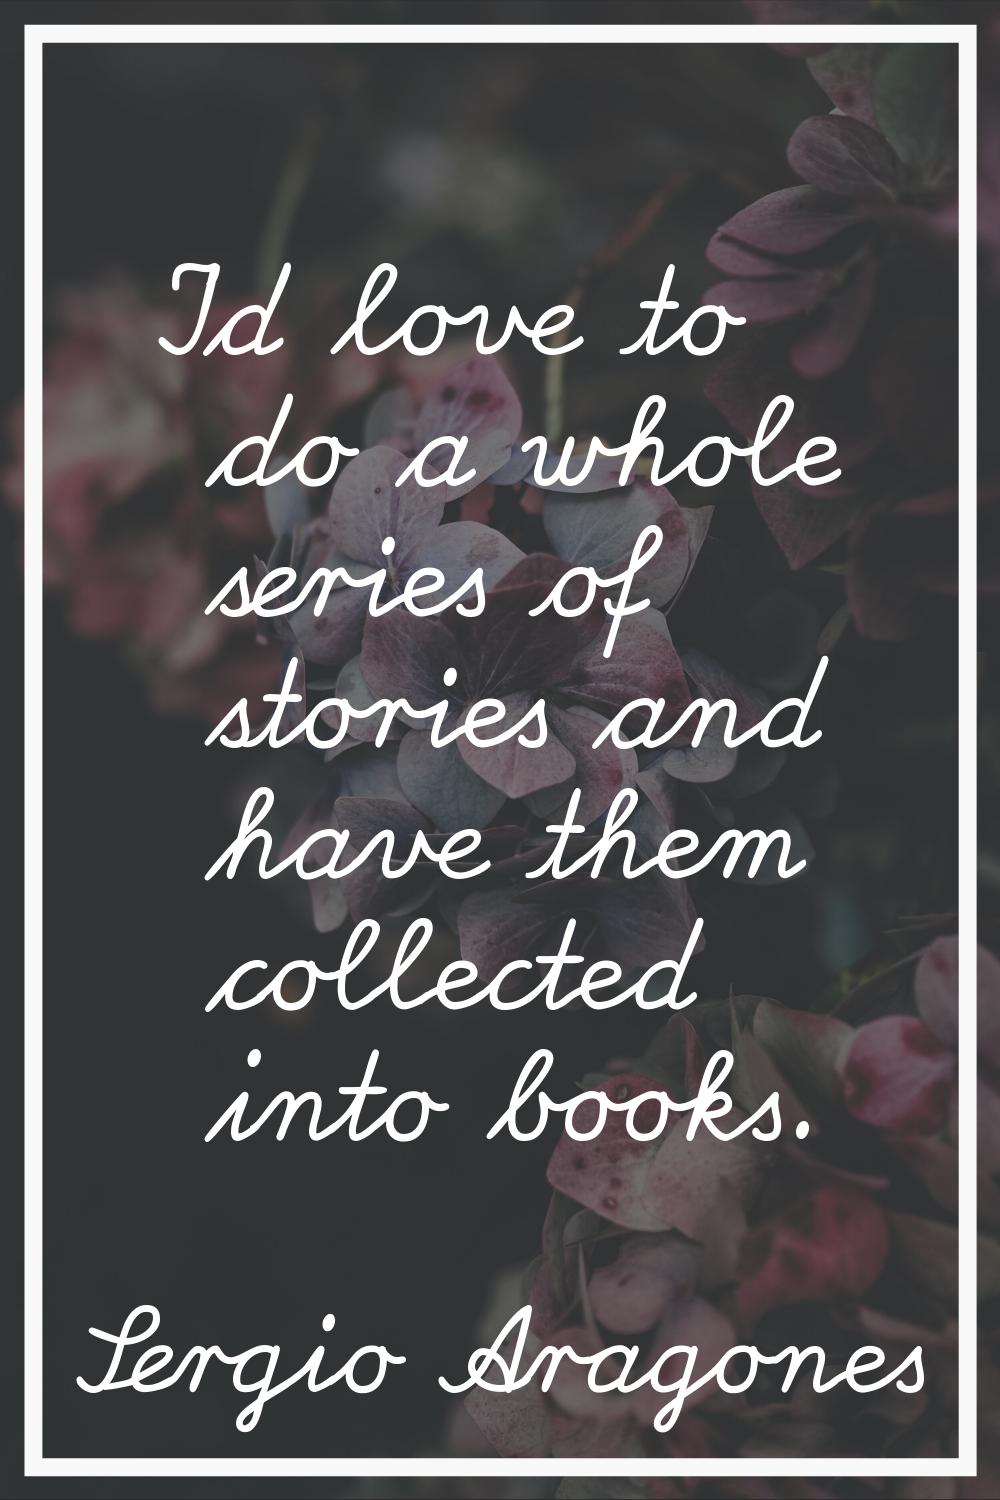 I'd love to do a whole series of stories and have them collected into books.